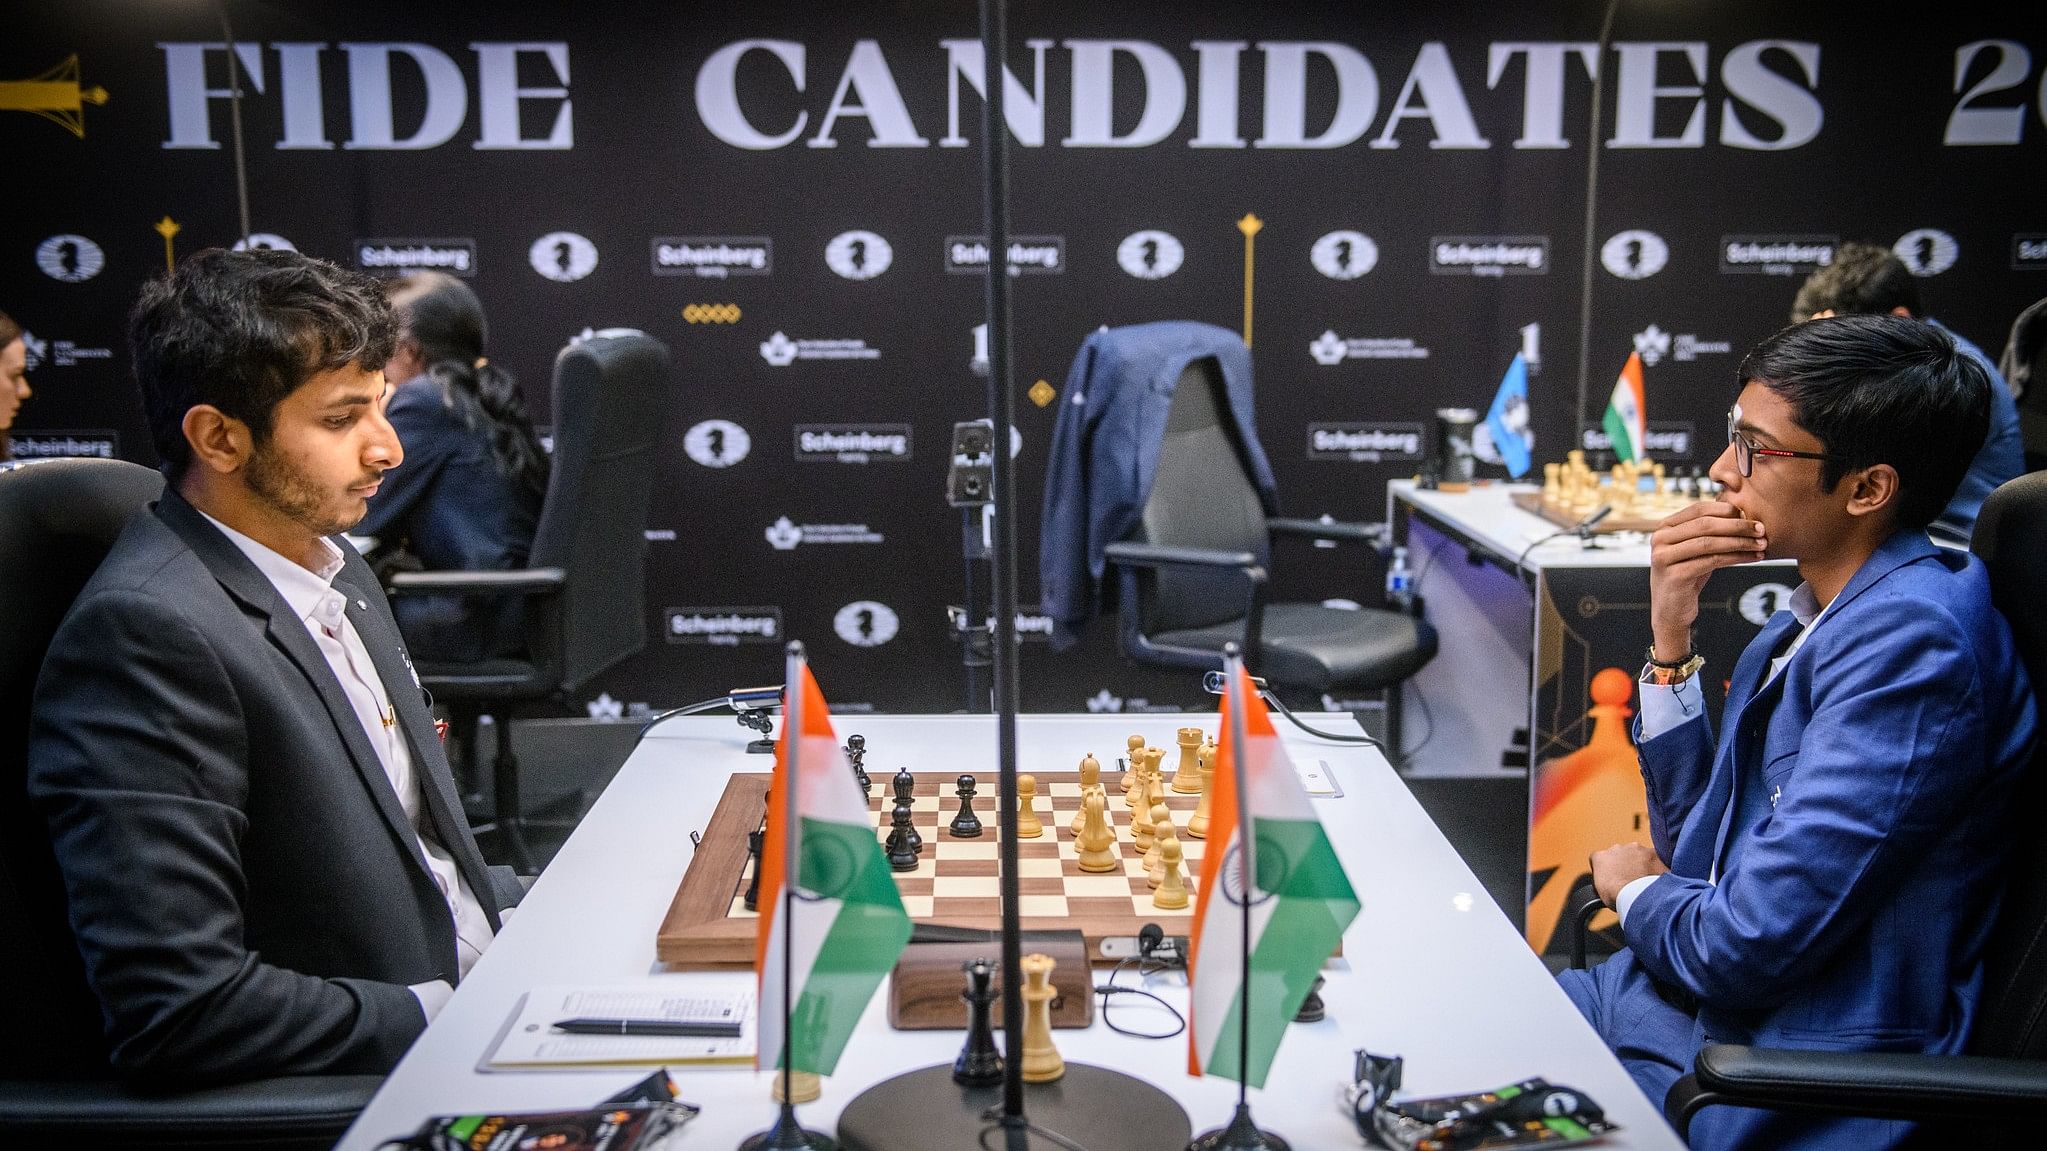 <div class="paragraphs"><p>Praggnanandhaa R (2747) and Vidit Santosh Gujrathi (2727) draw their game after playing a very balanced chess round.</p></div>